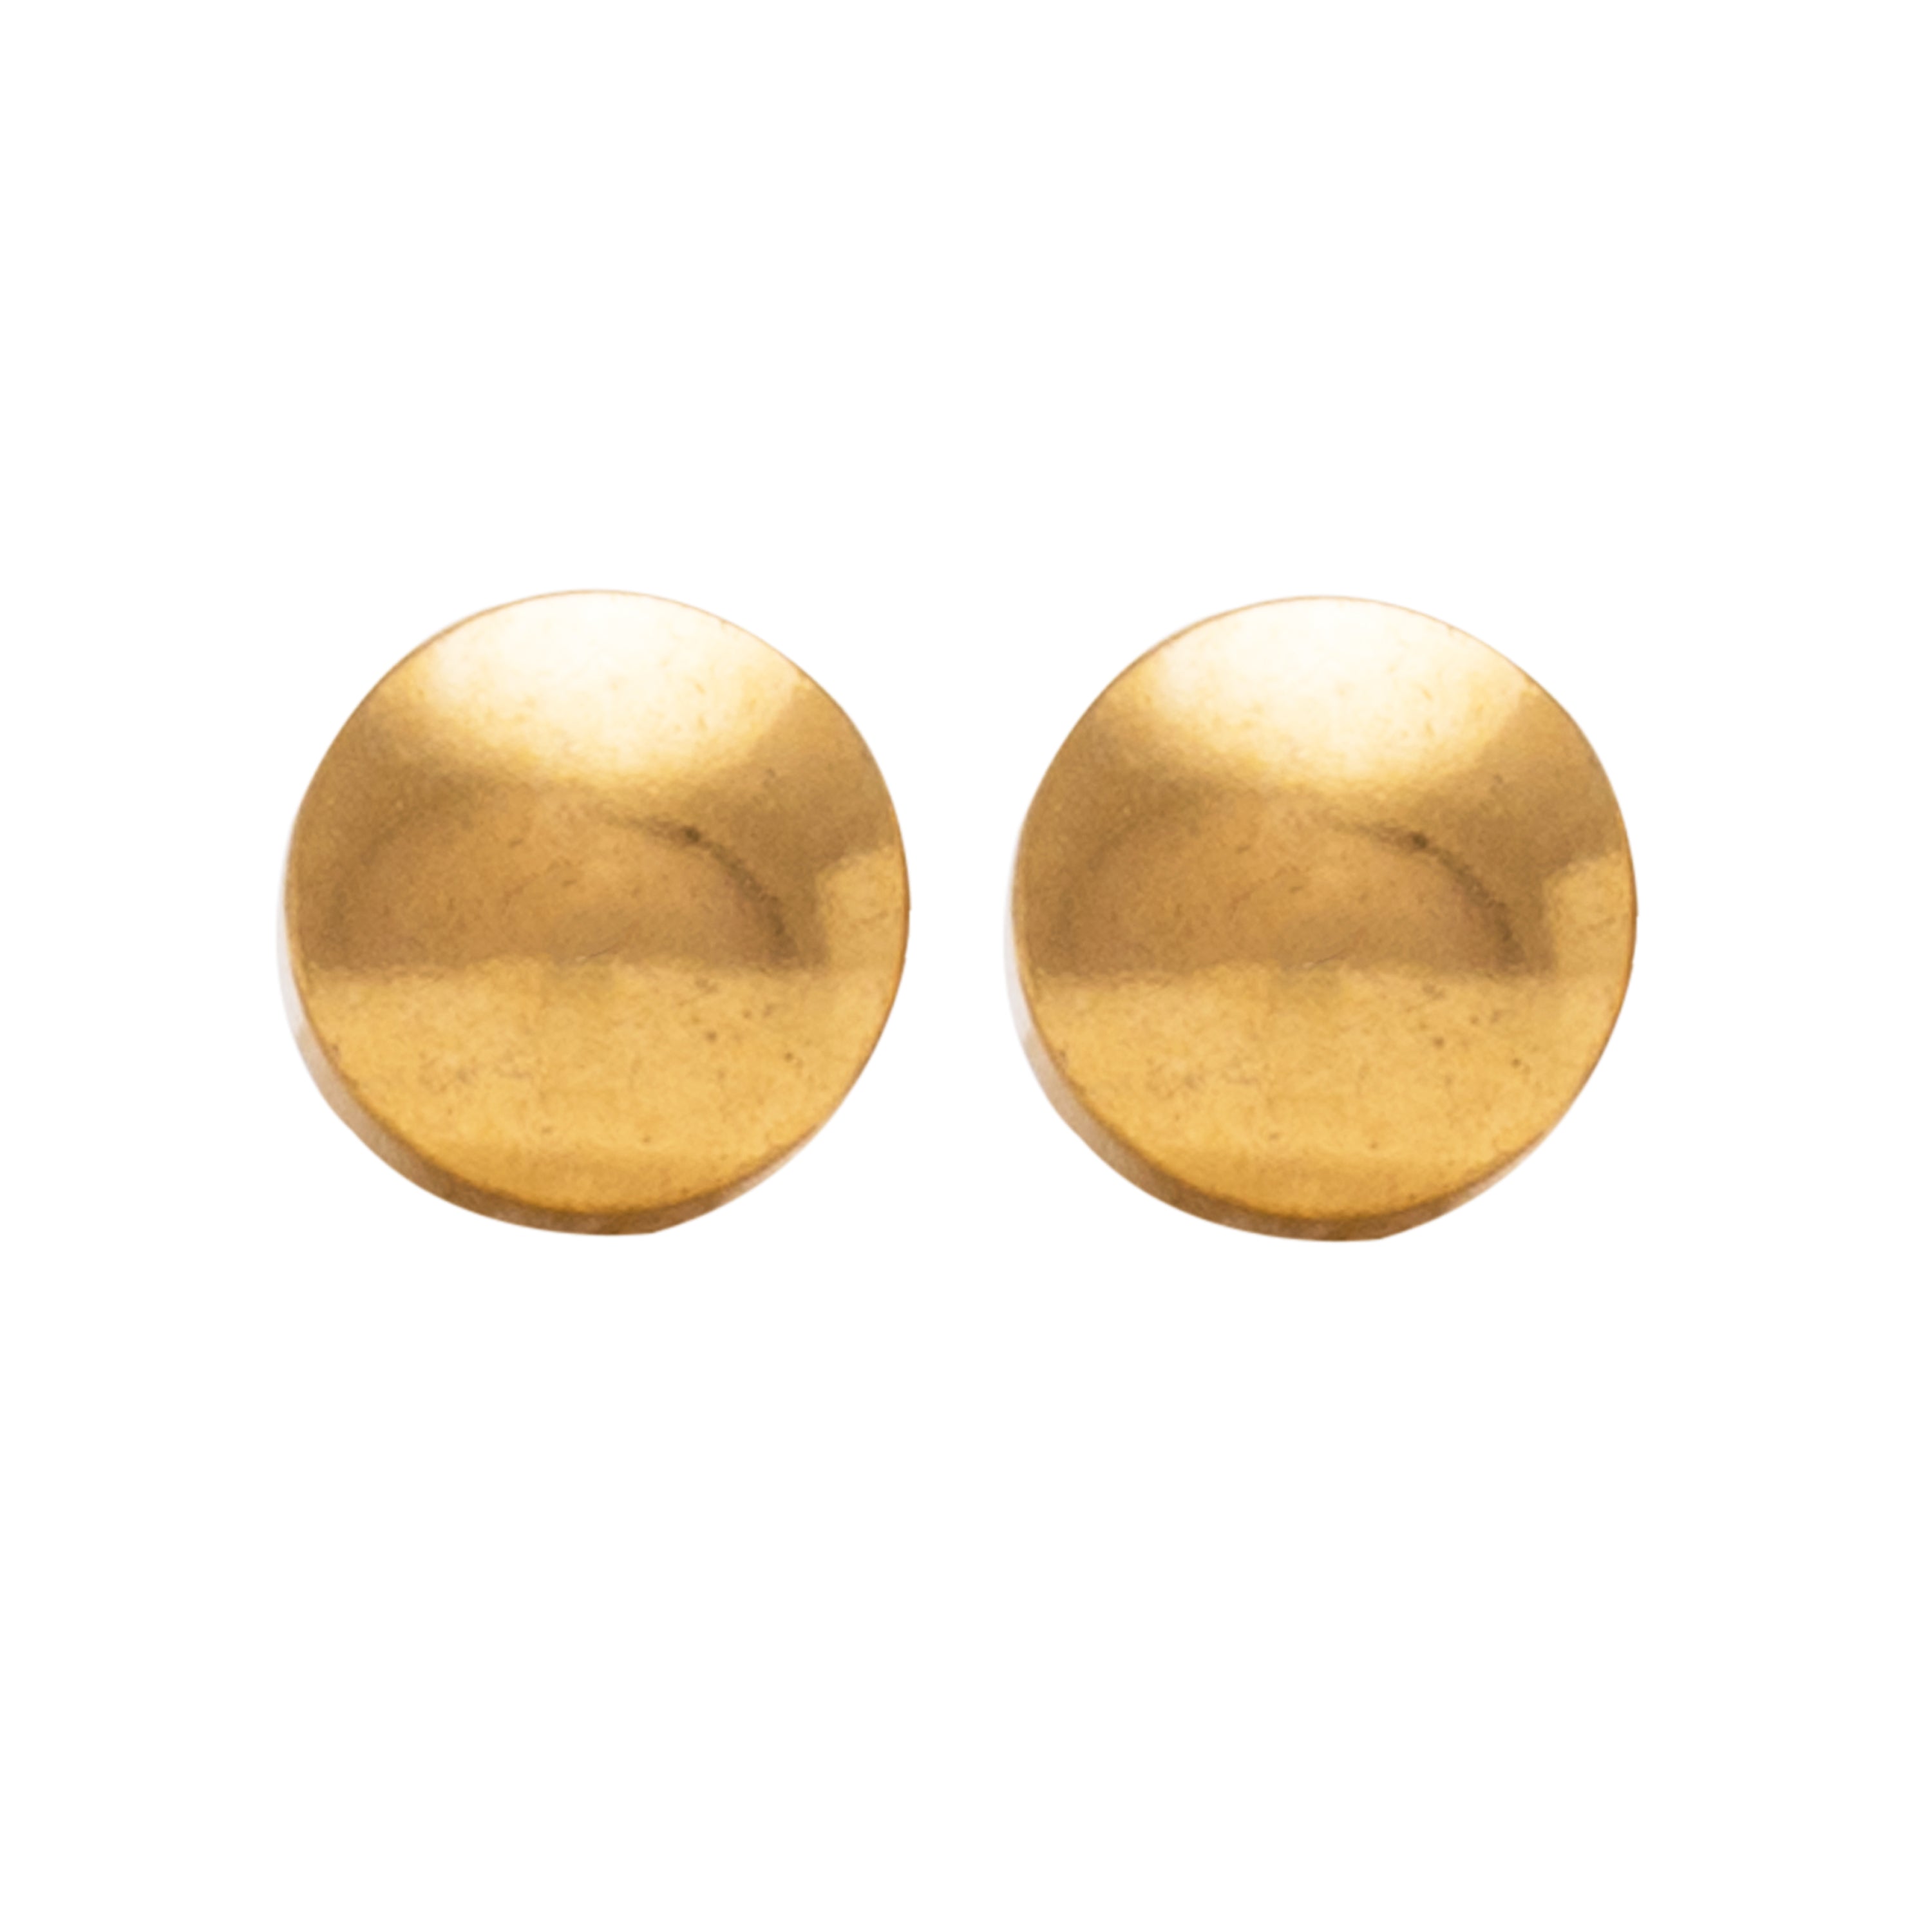 4MM Traditional Ball 24K Pure Gold Plated Ear Studs | MADE IN USA | Ideal for everyday wear